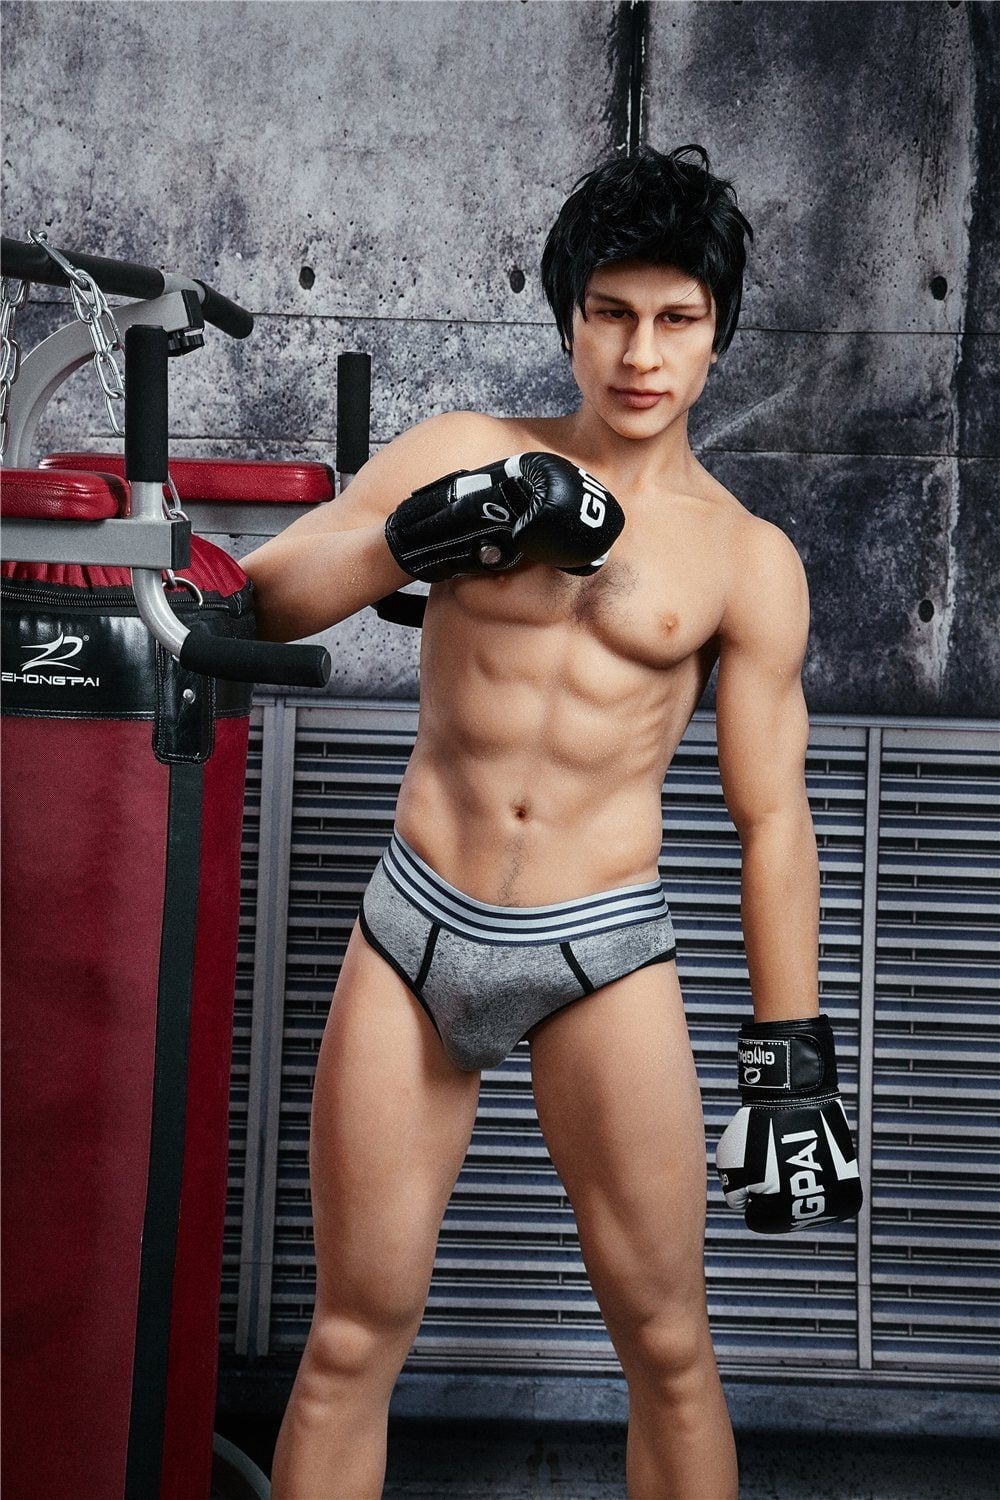 Charles TPE Male Doll - Iron Tech Doll Irontech Doll